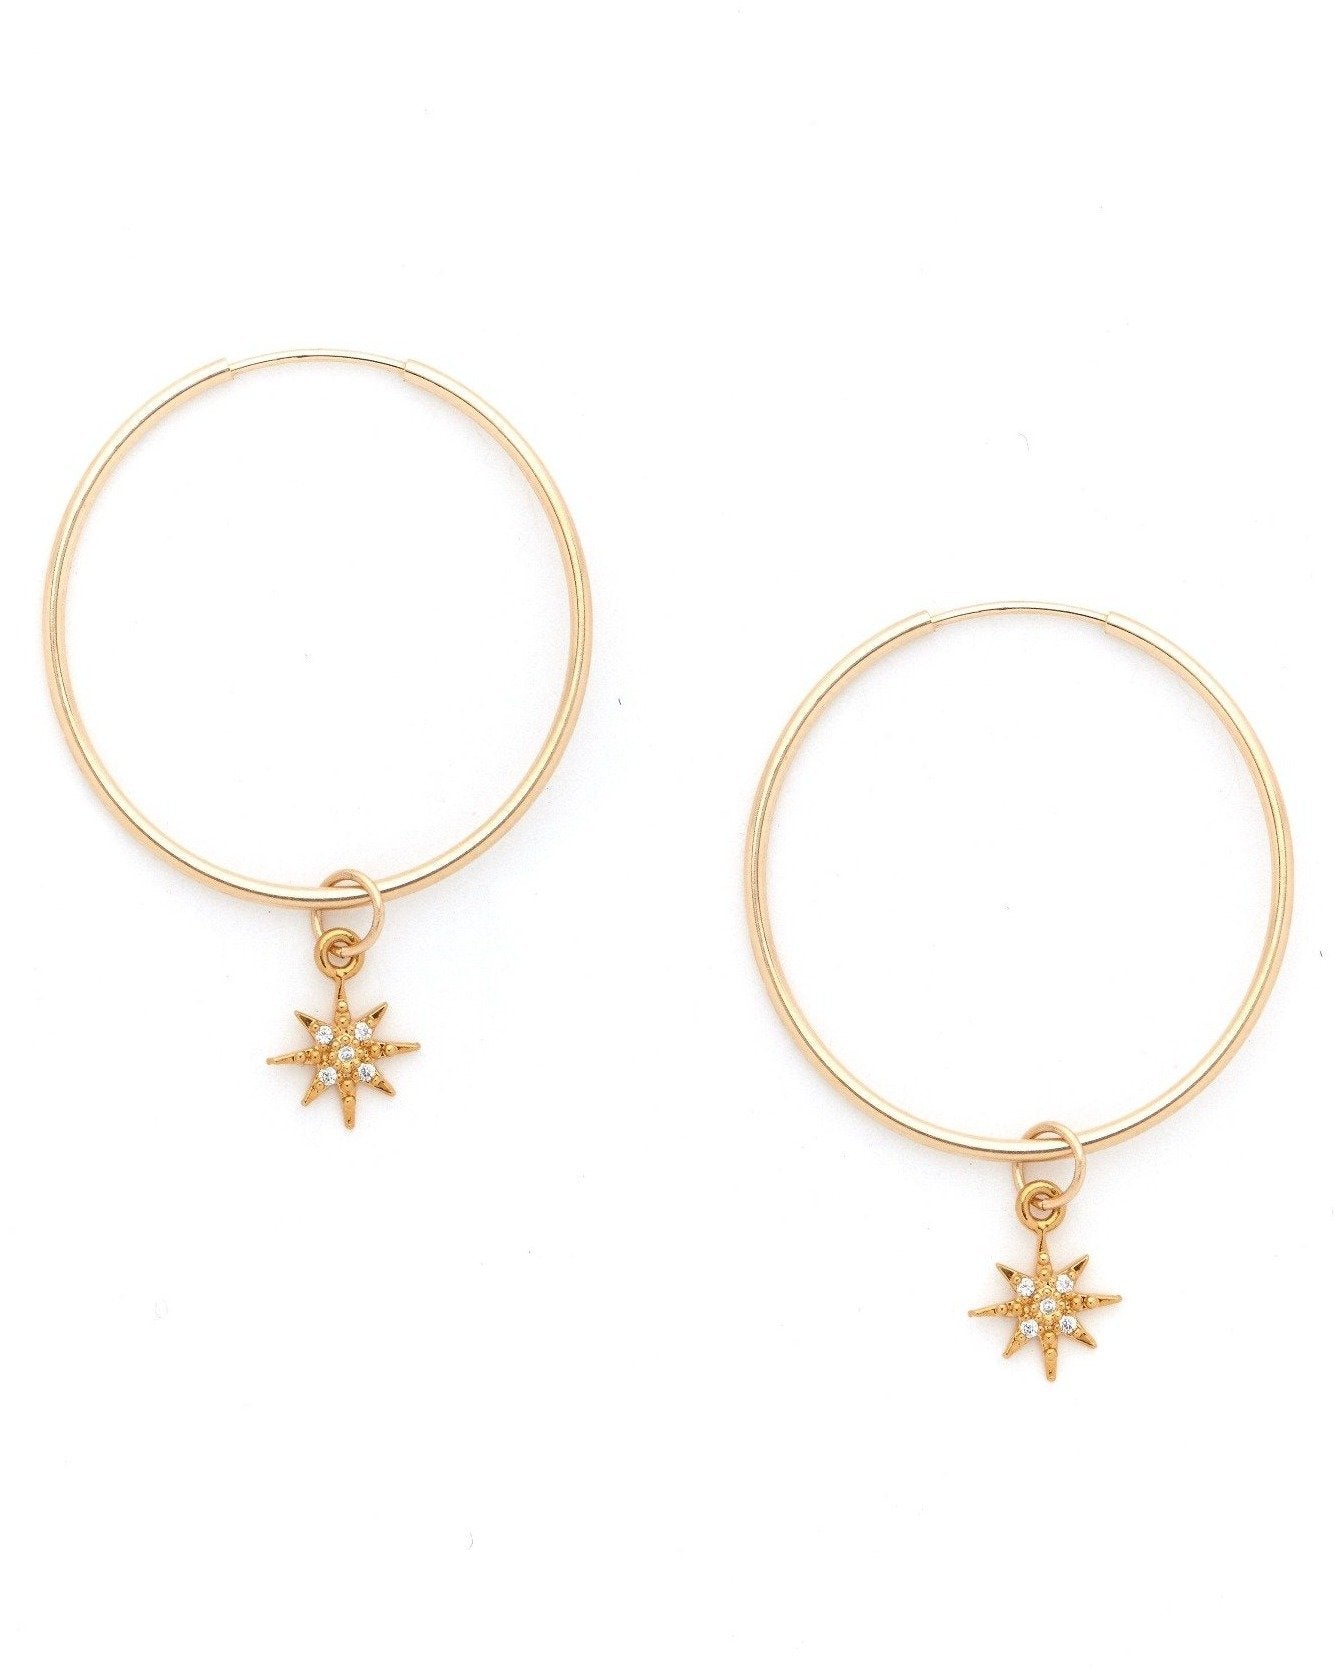 Soleil Hoop Earrings by KOZAKH. 30mm hoop earrings, crafted in 14K Gold Filled, featuring a dangling Cubic Zirconia 6 point star charm.